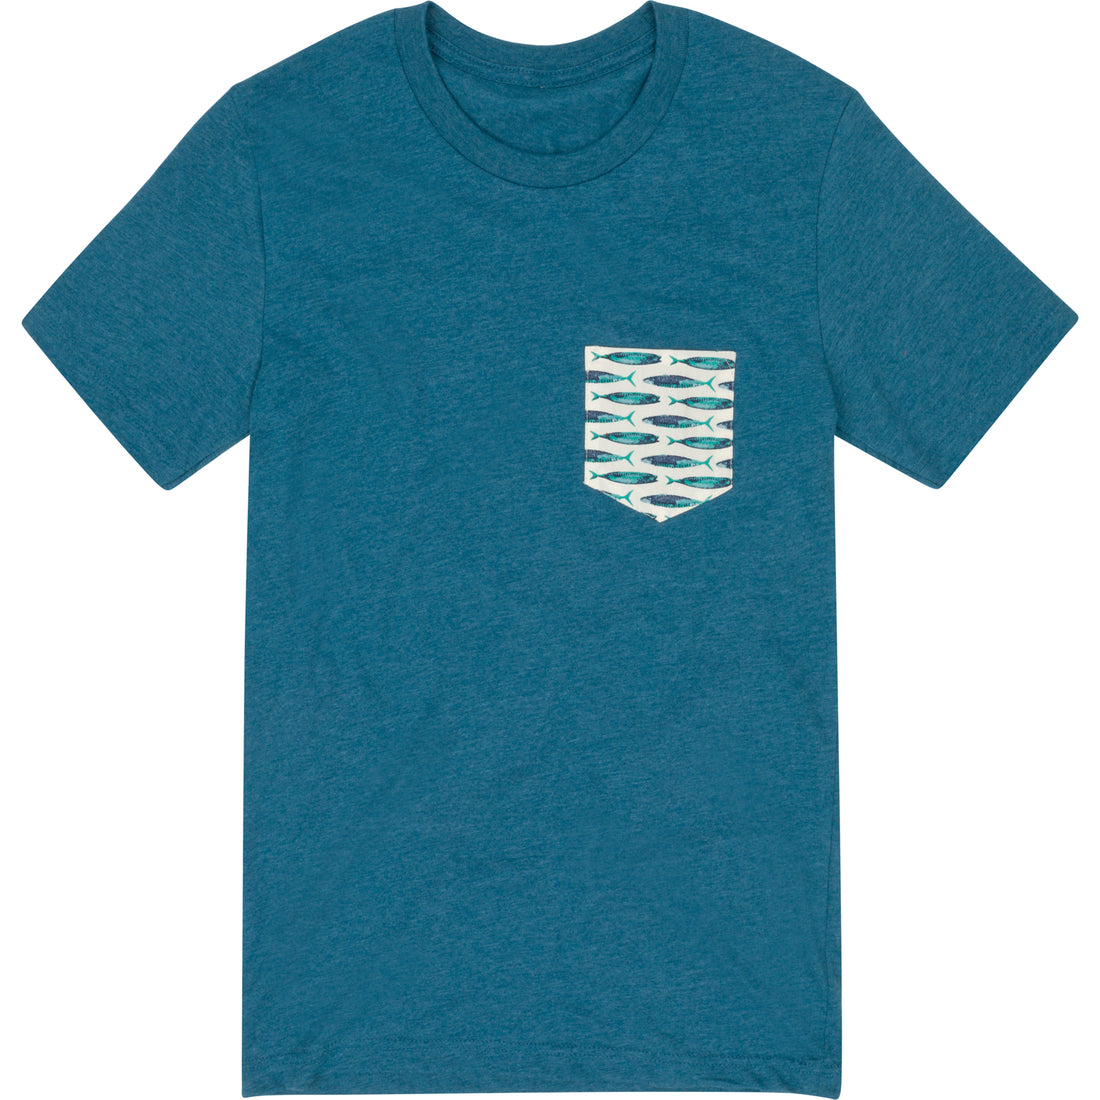 Teal Blue With Summer Fish Print Pocket Tee